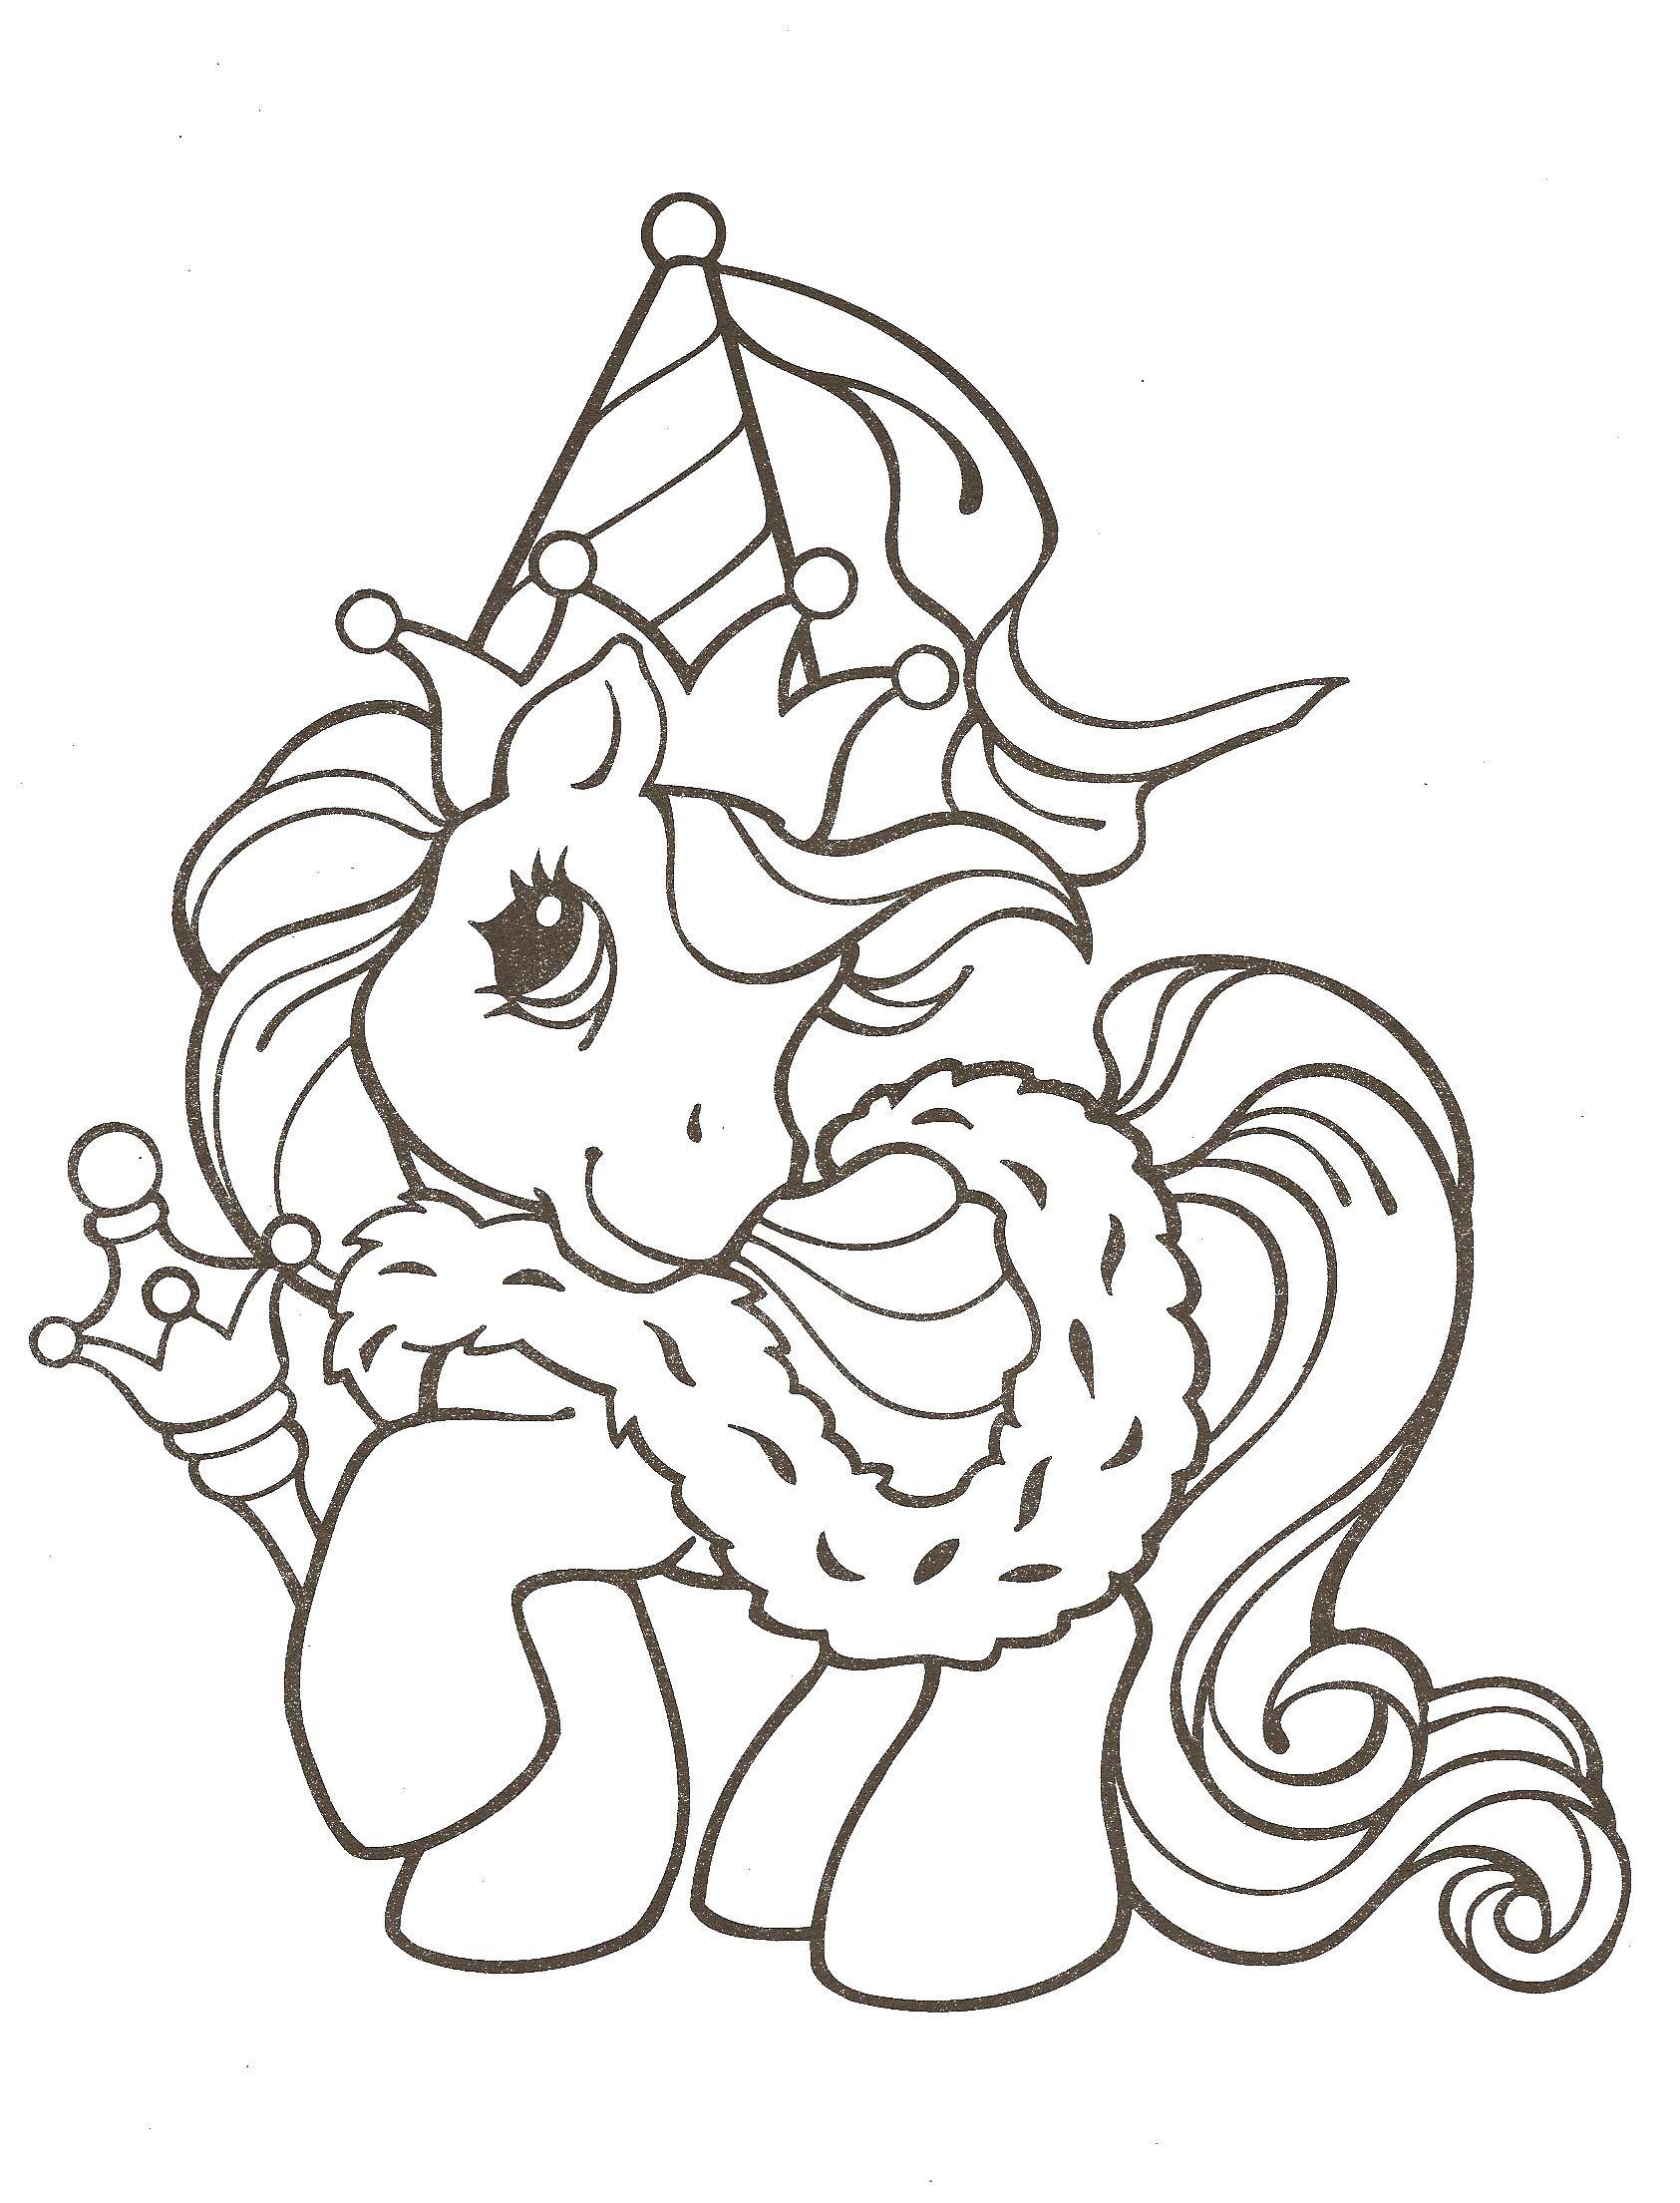 Coloring Welcome to ponyville!. Category Ponies. Tags:  Pony, My little pony.